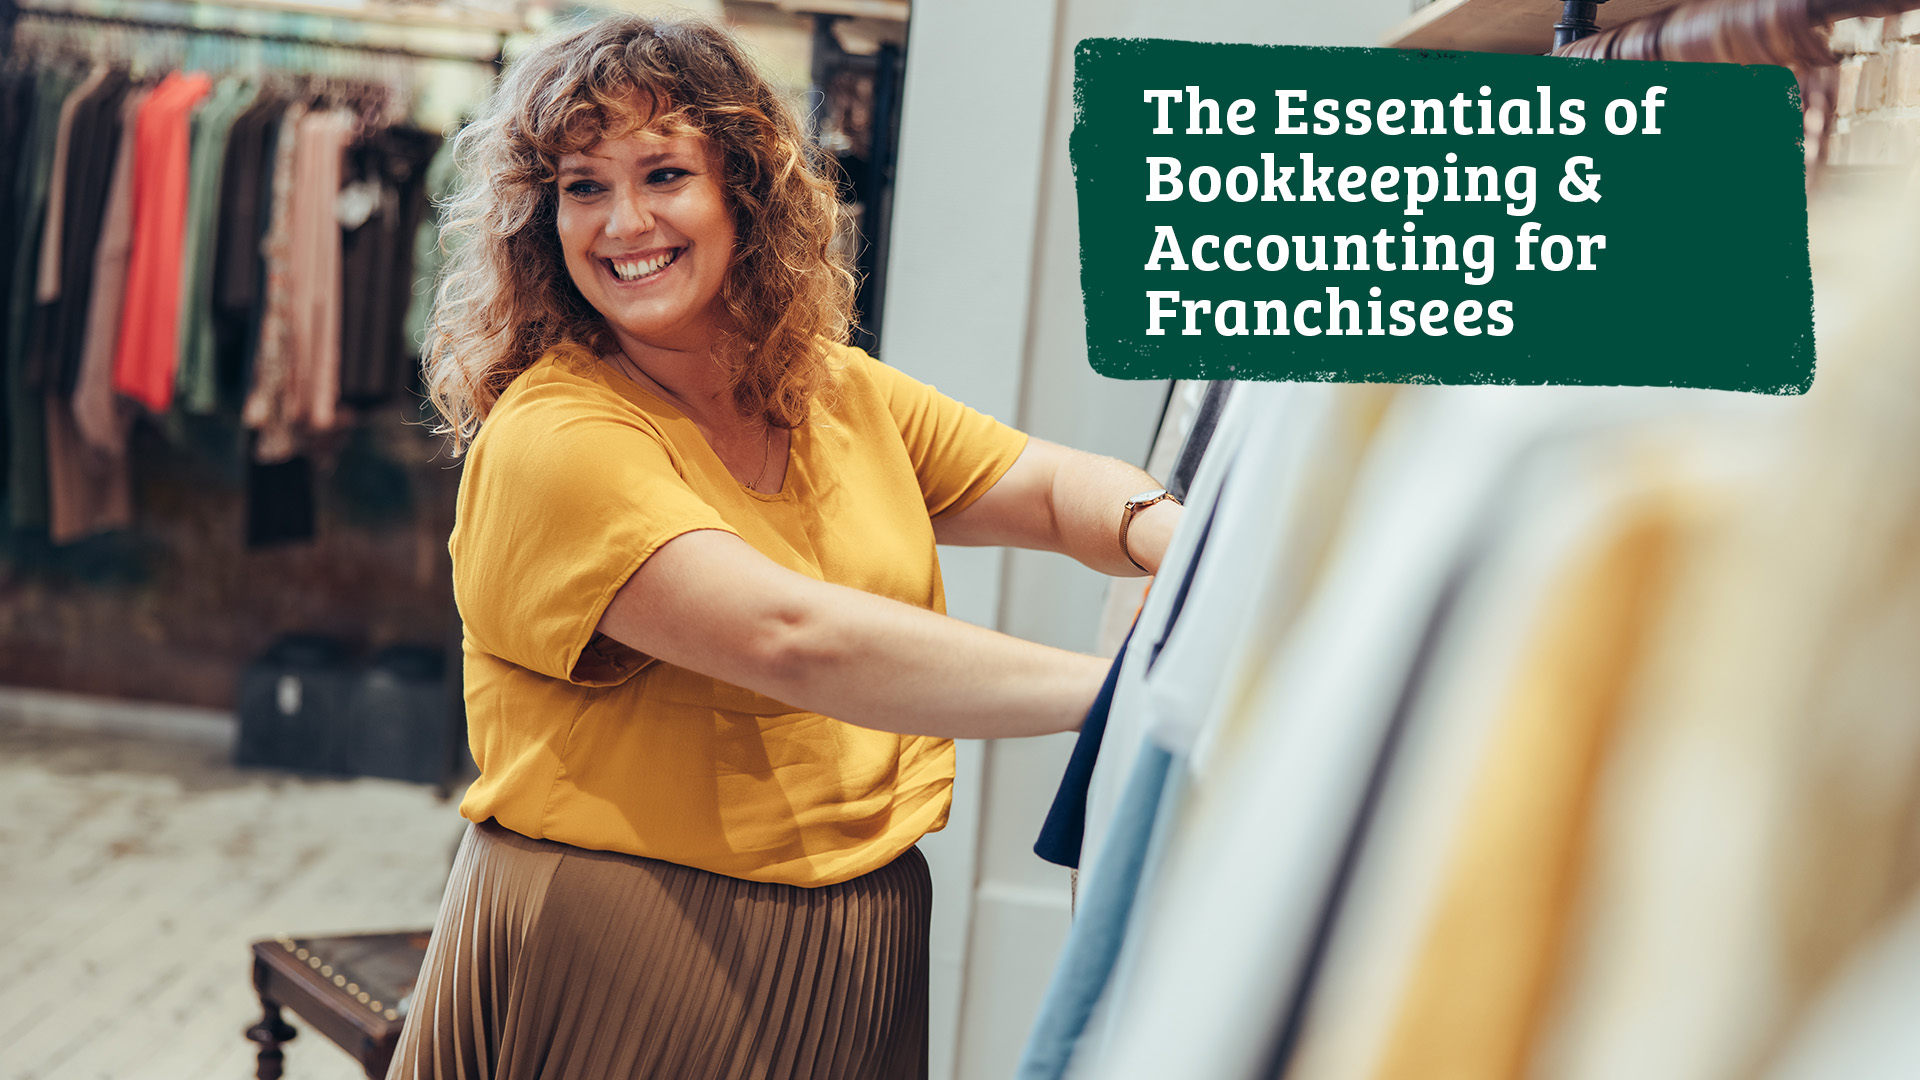 The Essentials of Accounting & Bookkeeping for Franchisees